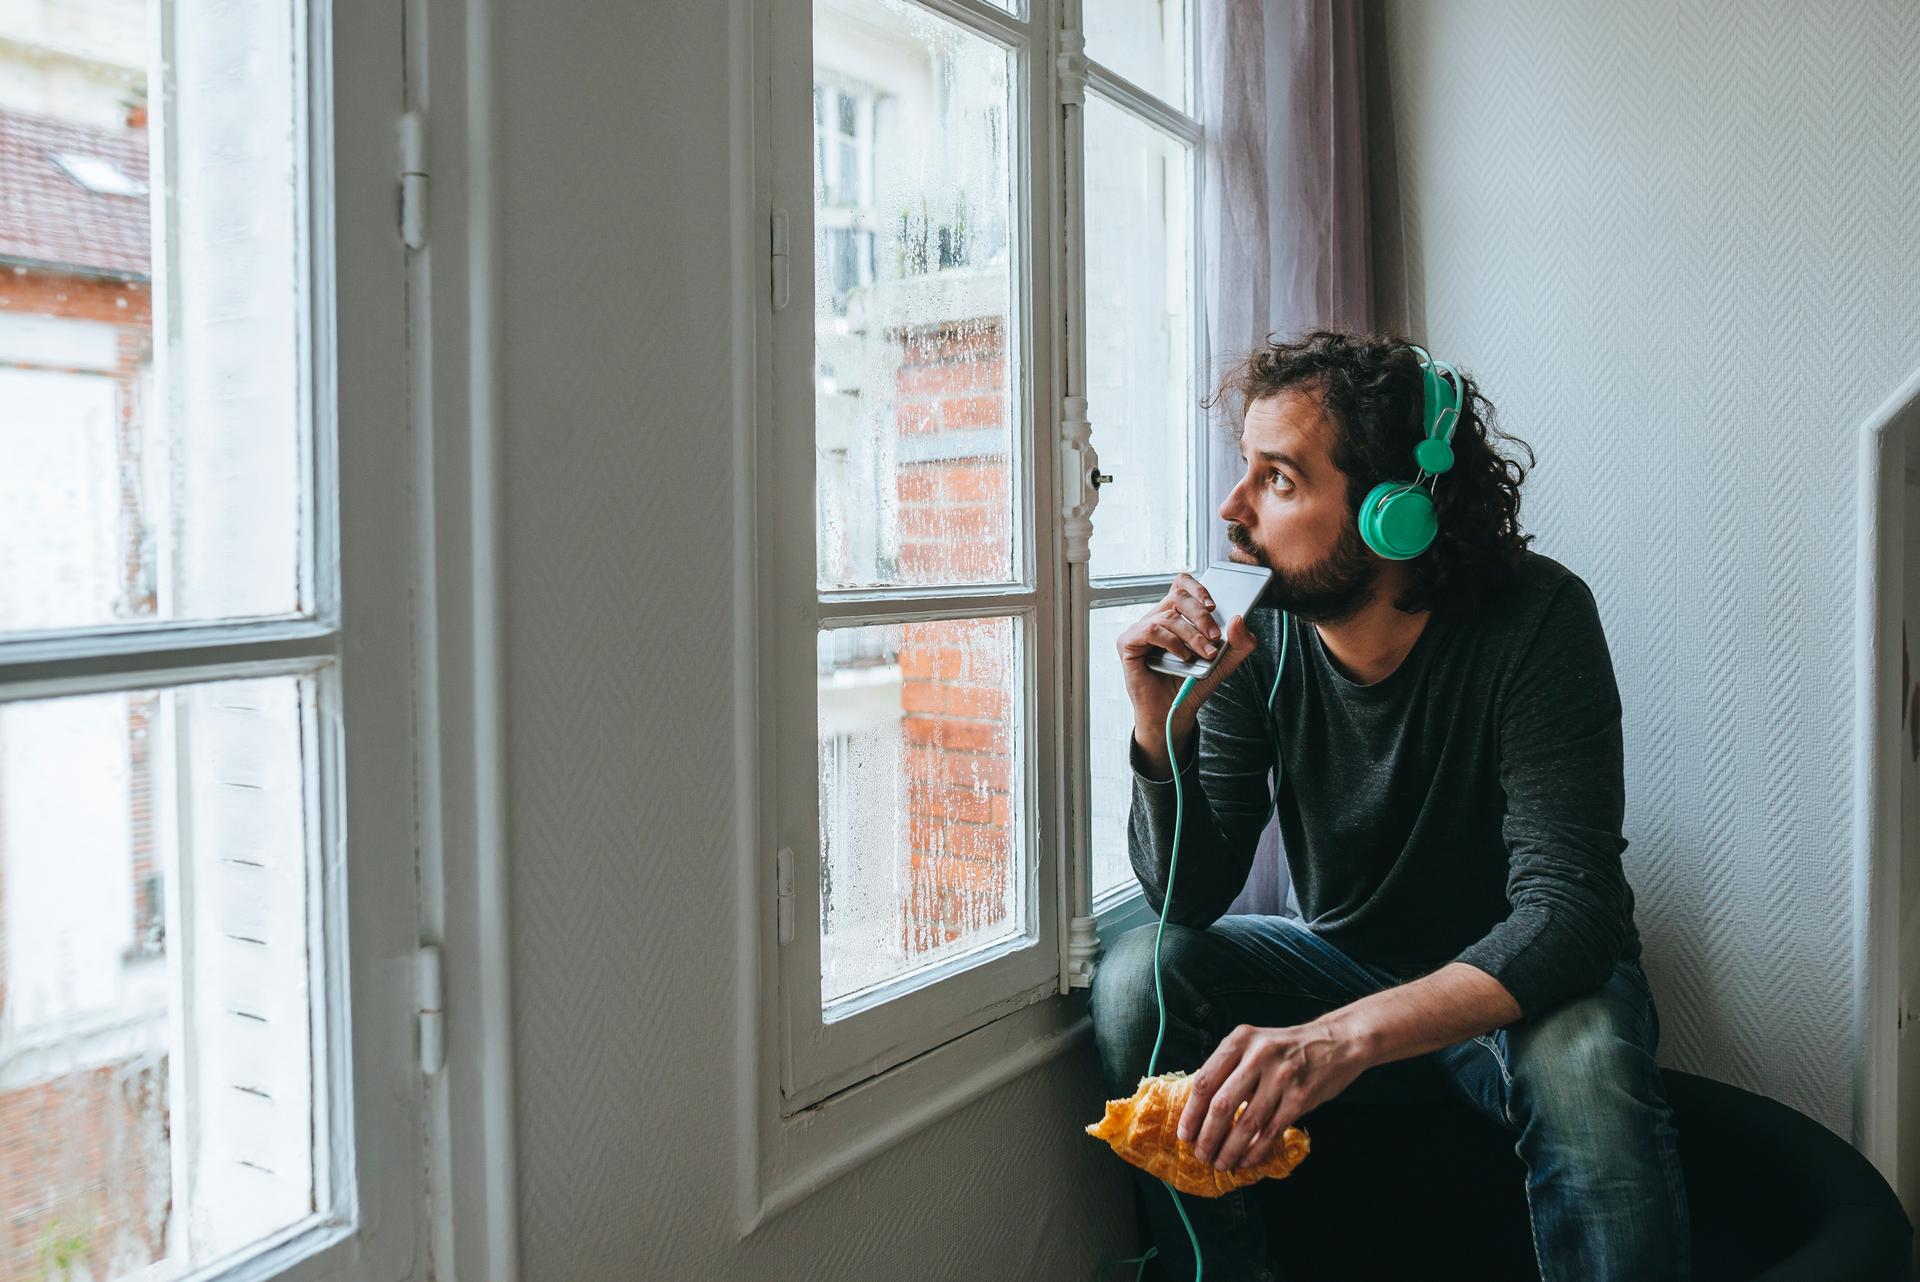 Man listening music with headphones and smartphone at home